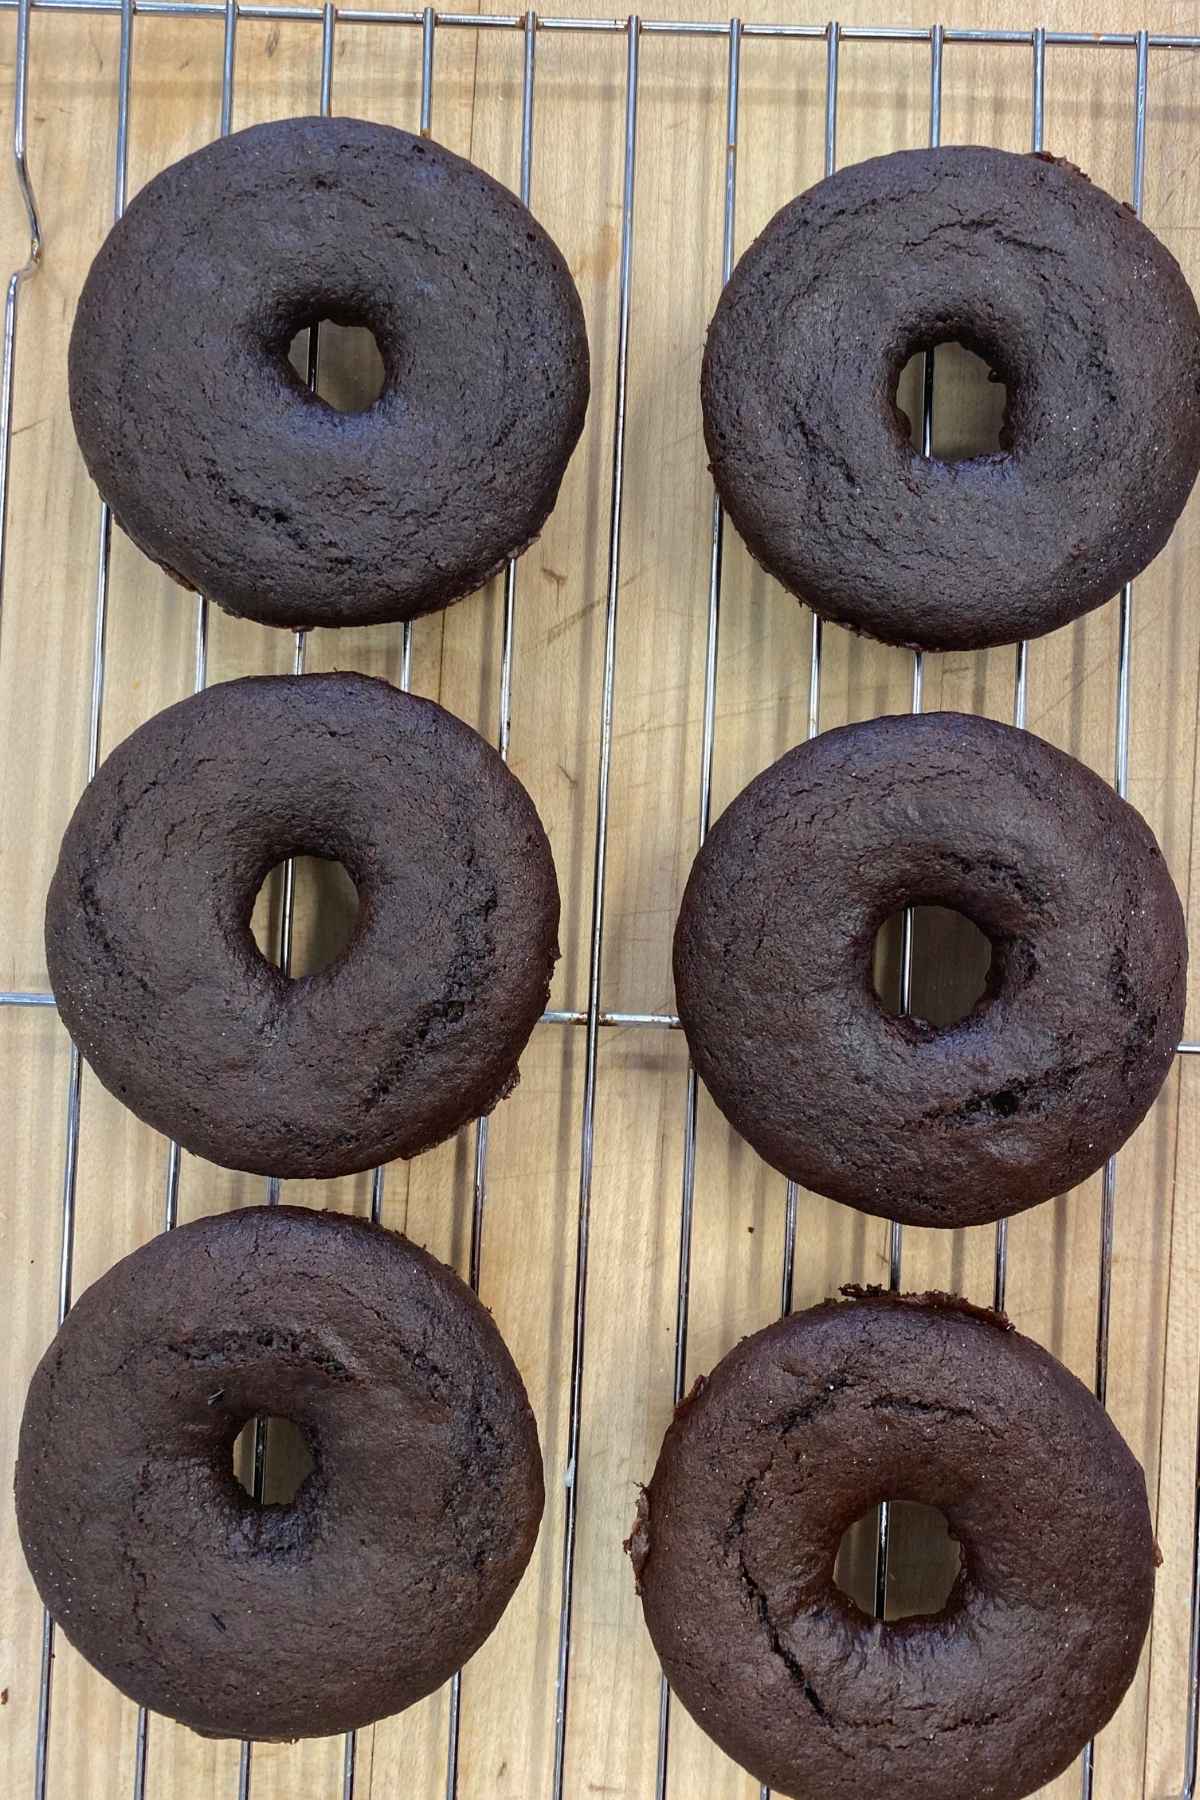 Baked Donuts cooling on a wire rack.